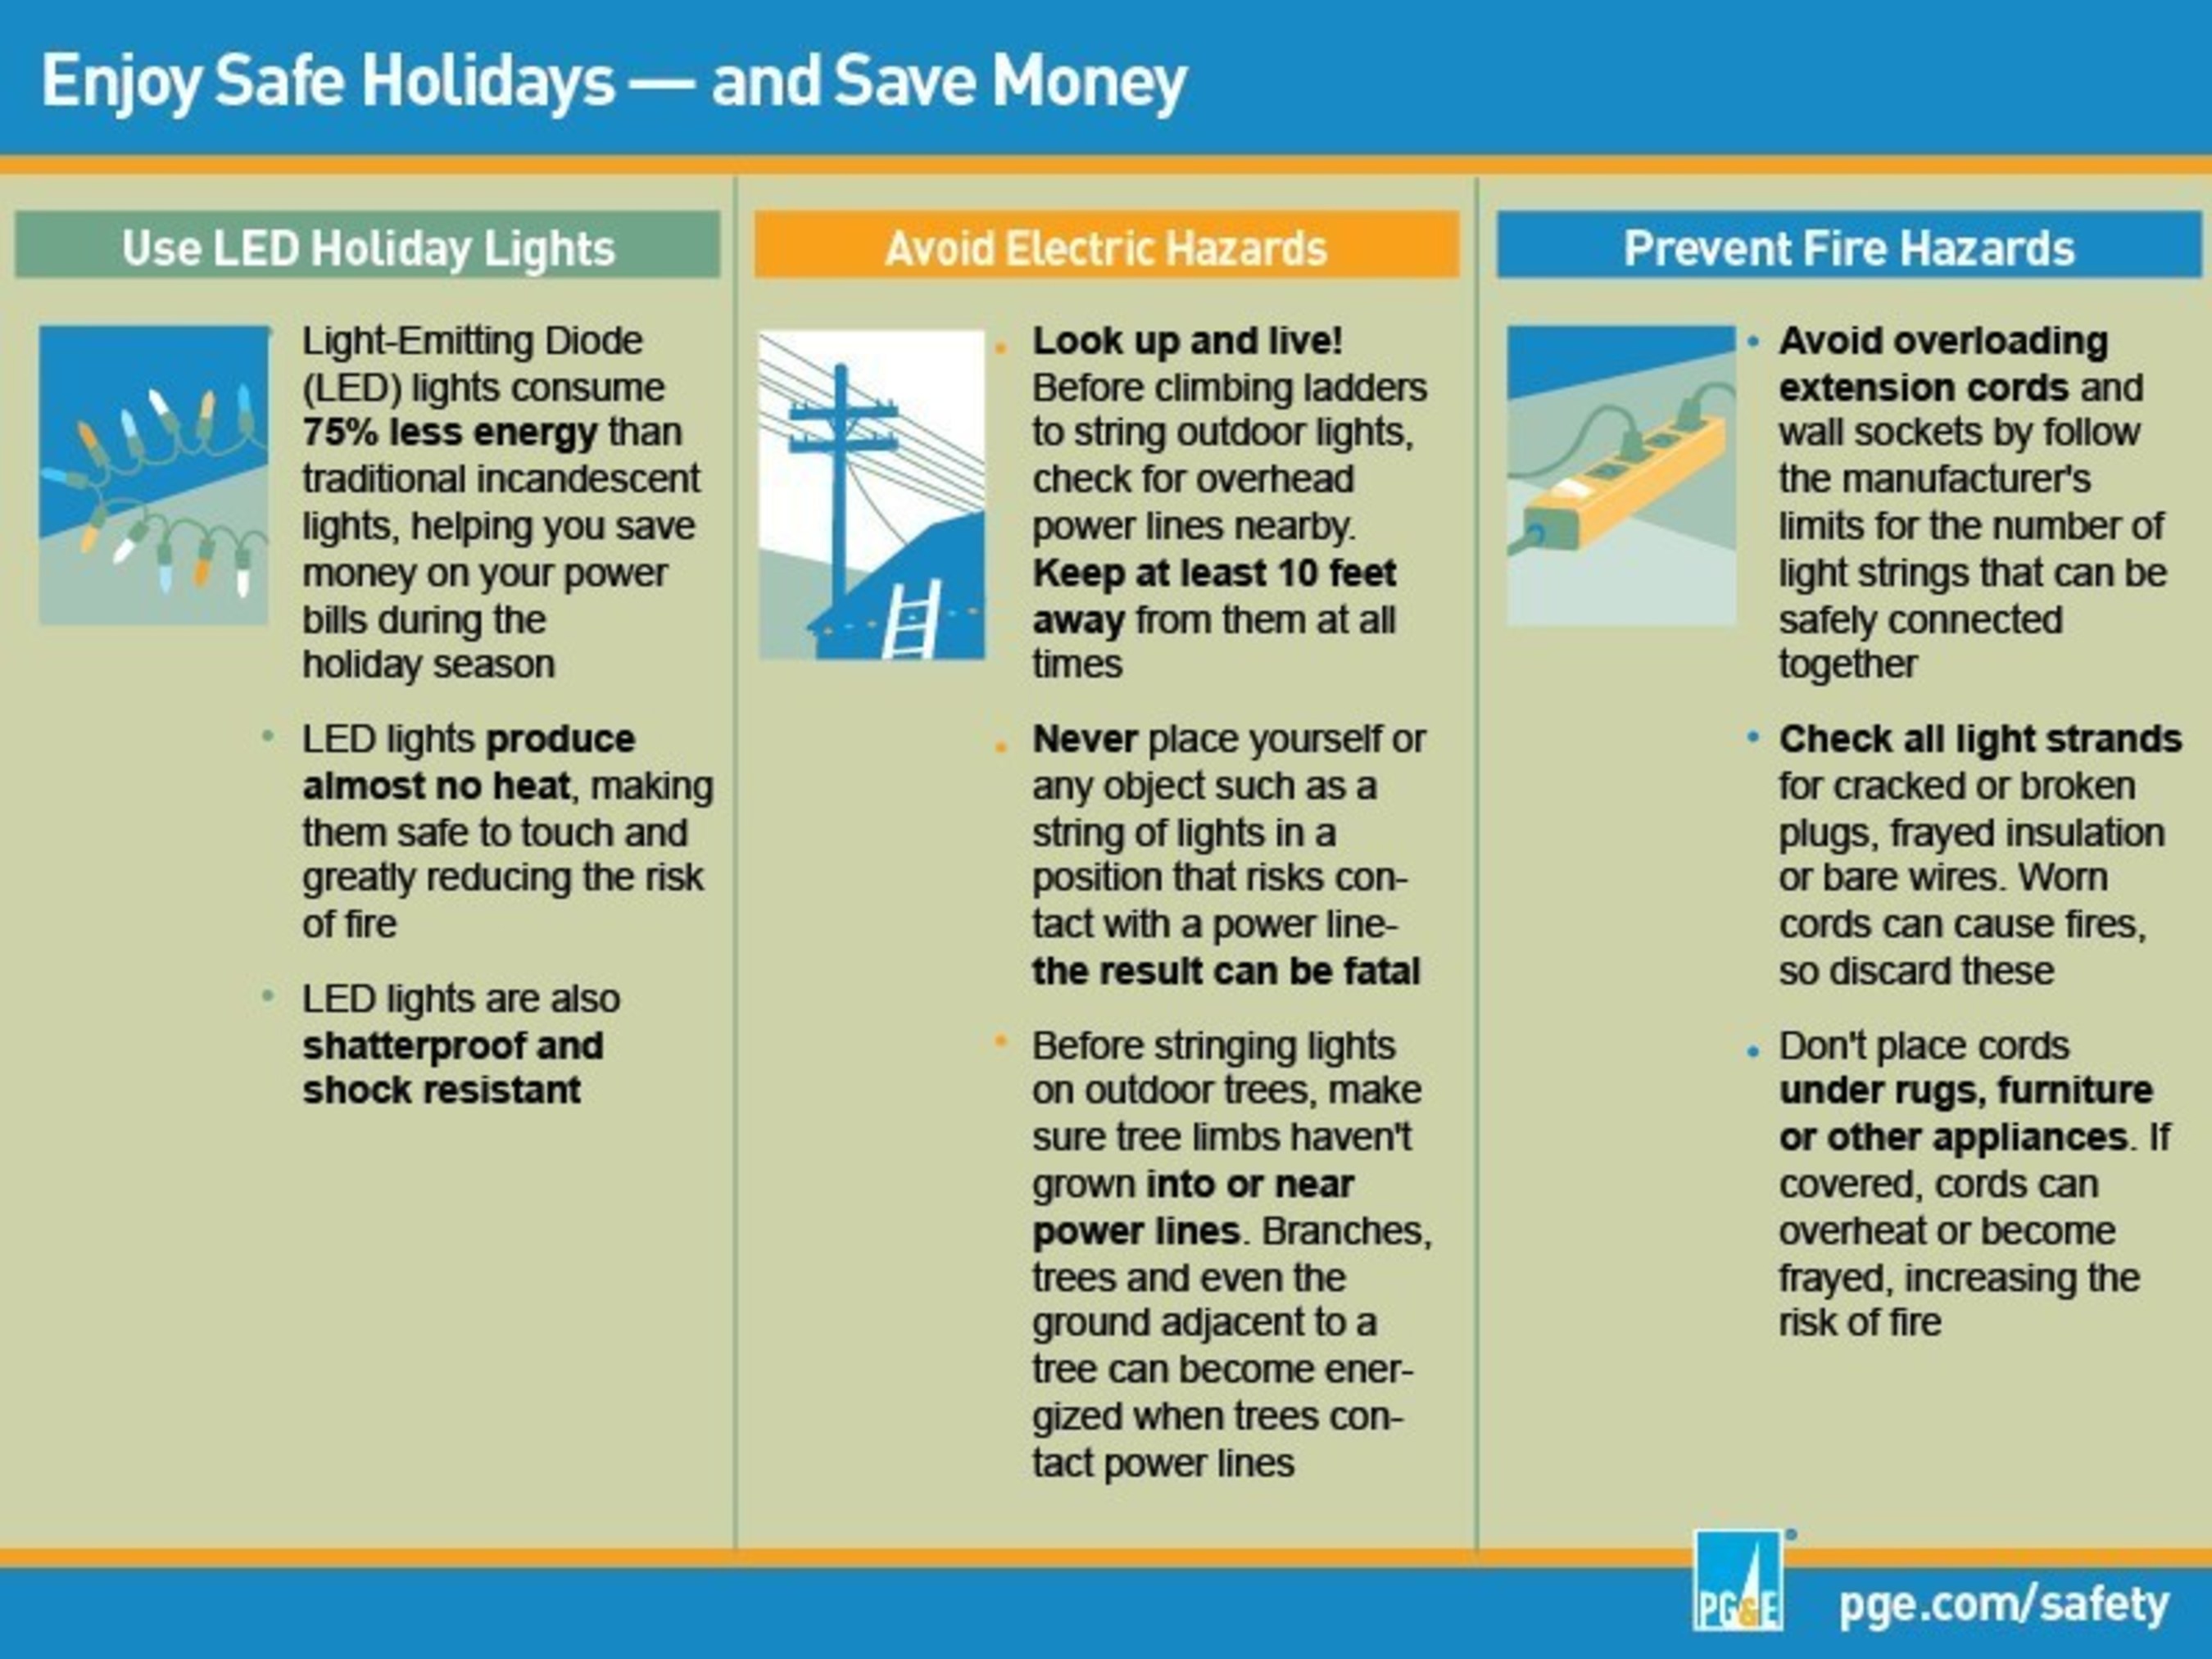 PG&E shares these tips for a safe and joyful holiday season.